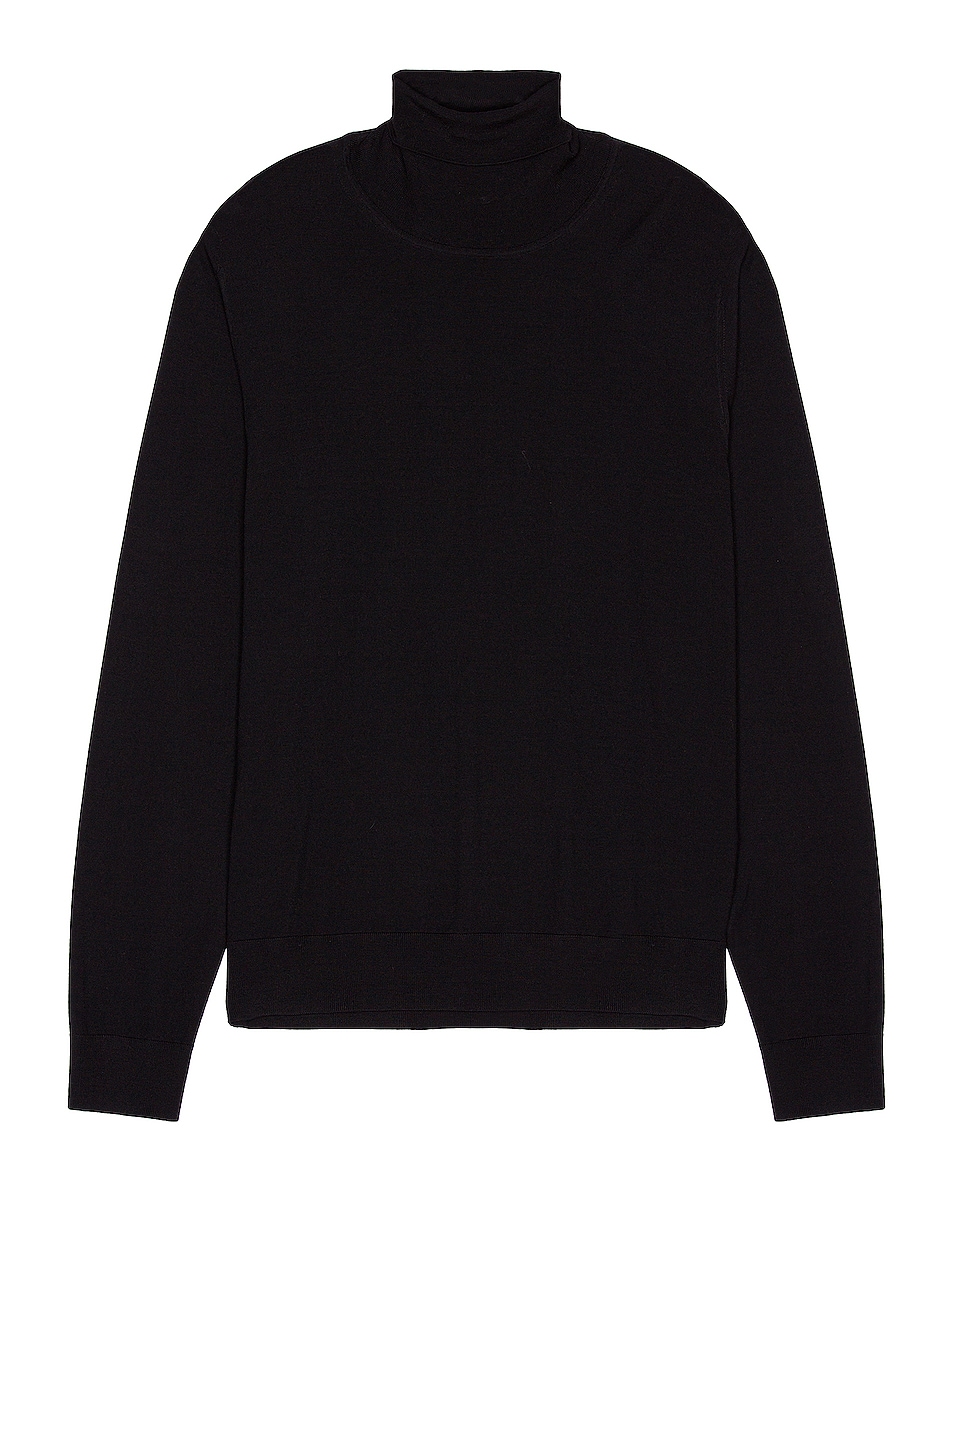 Image 1 of The Row Elam Top in Black